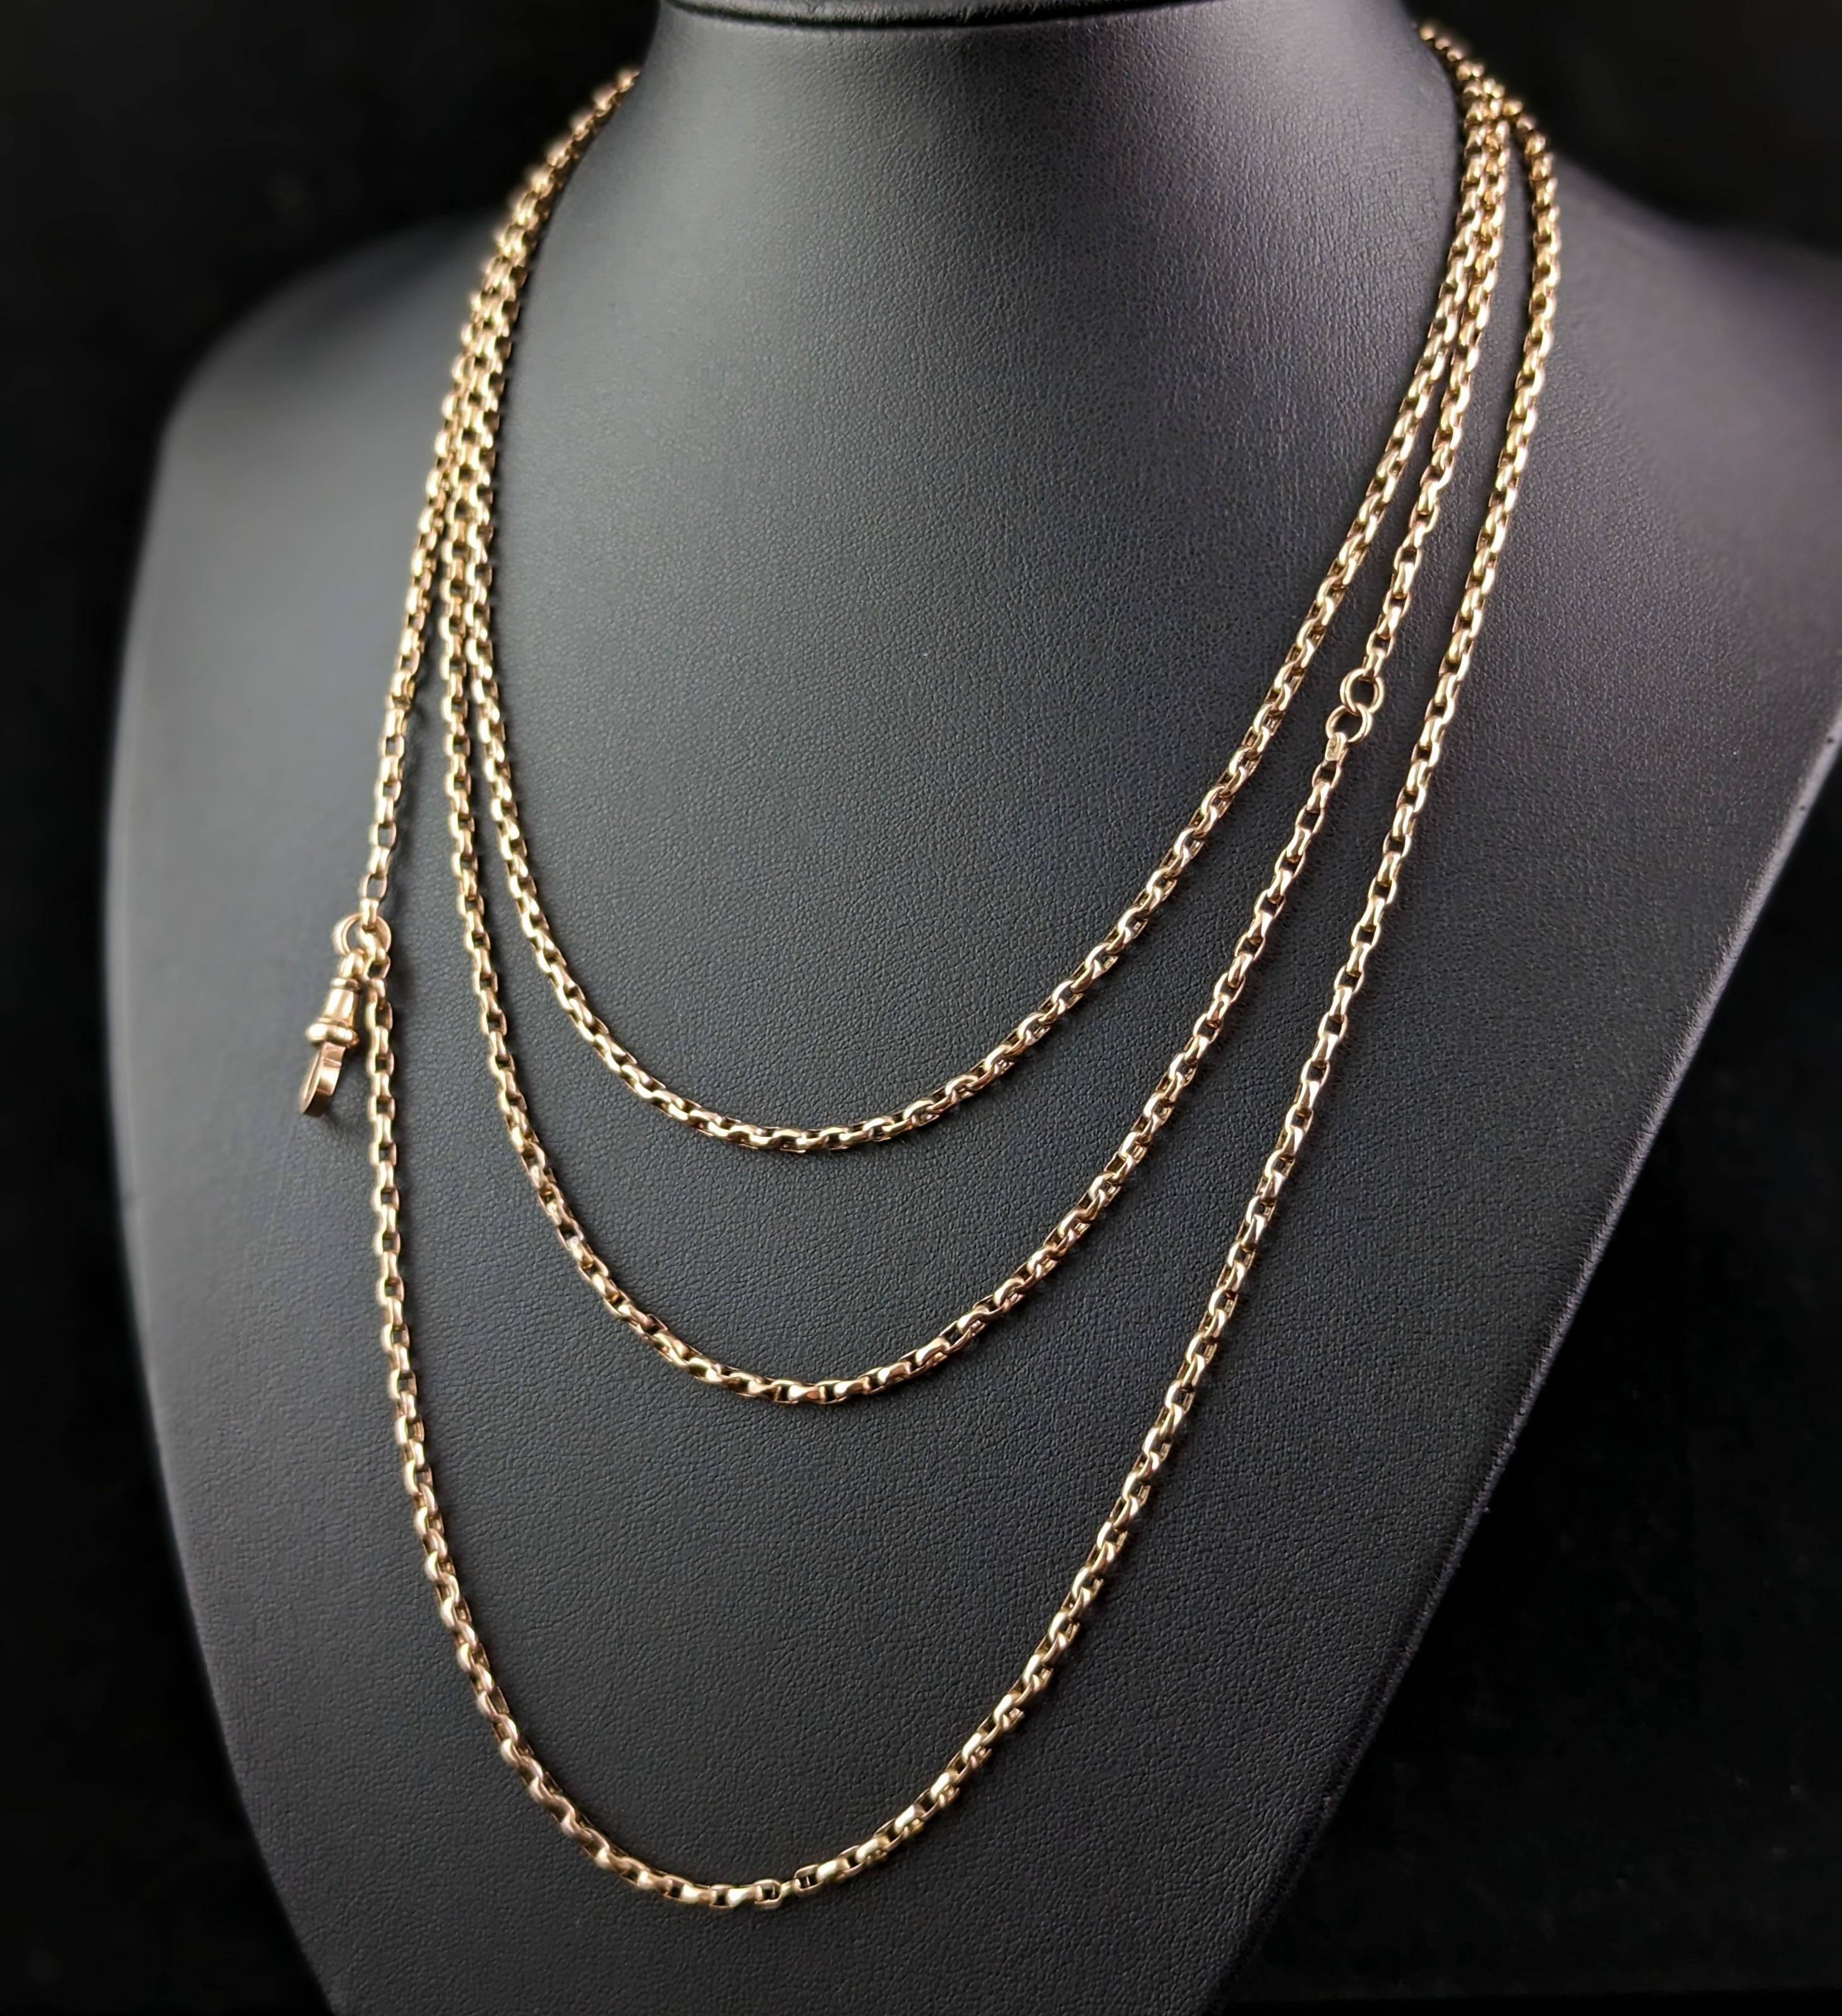 Victorian Antique 9k Yellow Gold Longuard Chain Necklace, Muff Chain